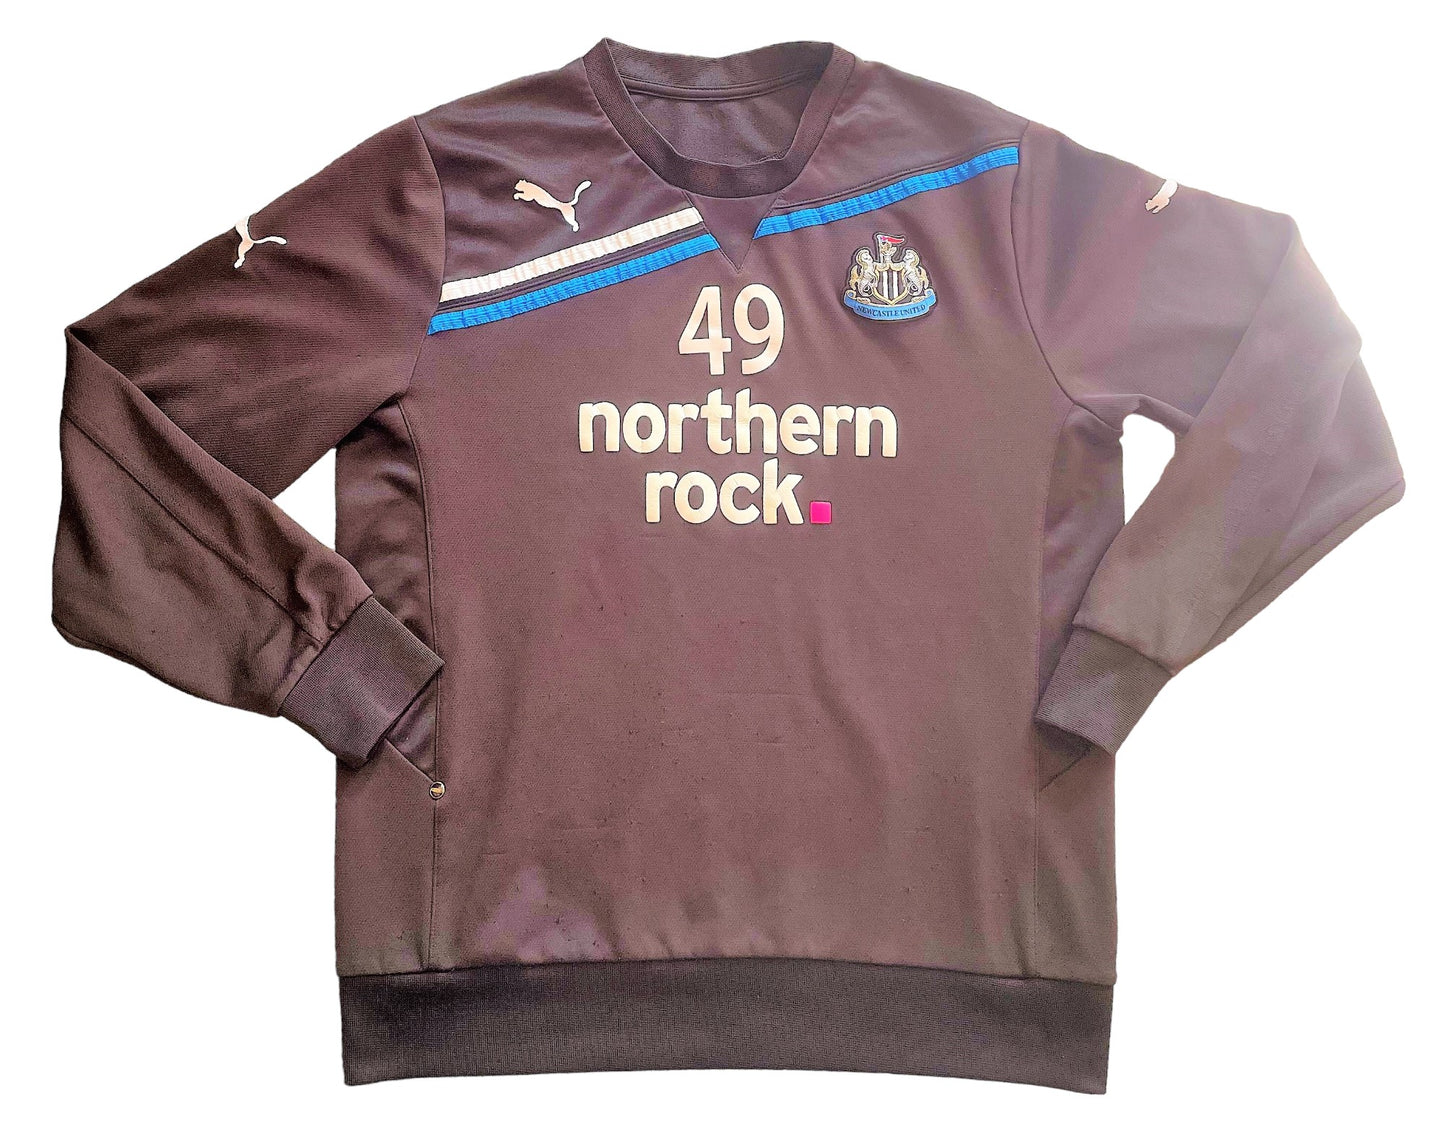 Newcastle Player Issue Sweatshirt 2011 (very good) Adults Large